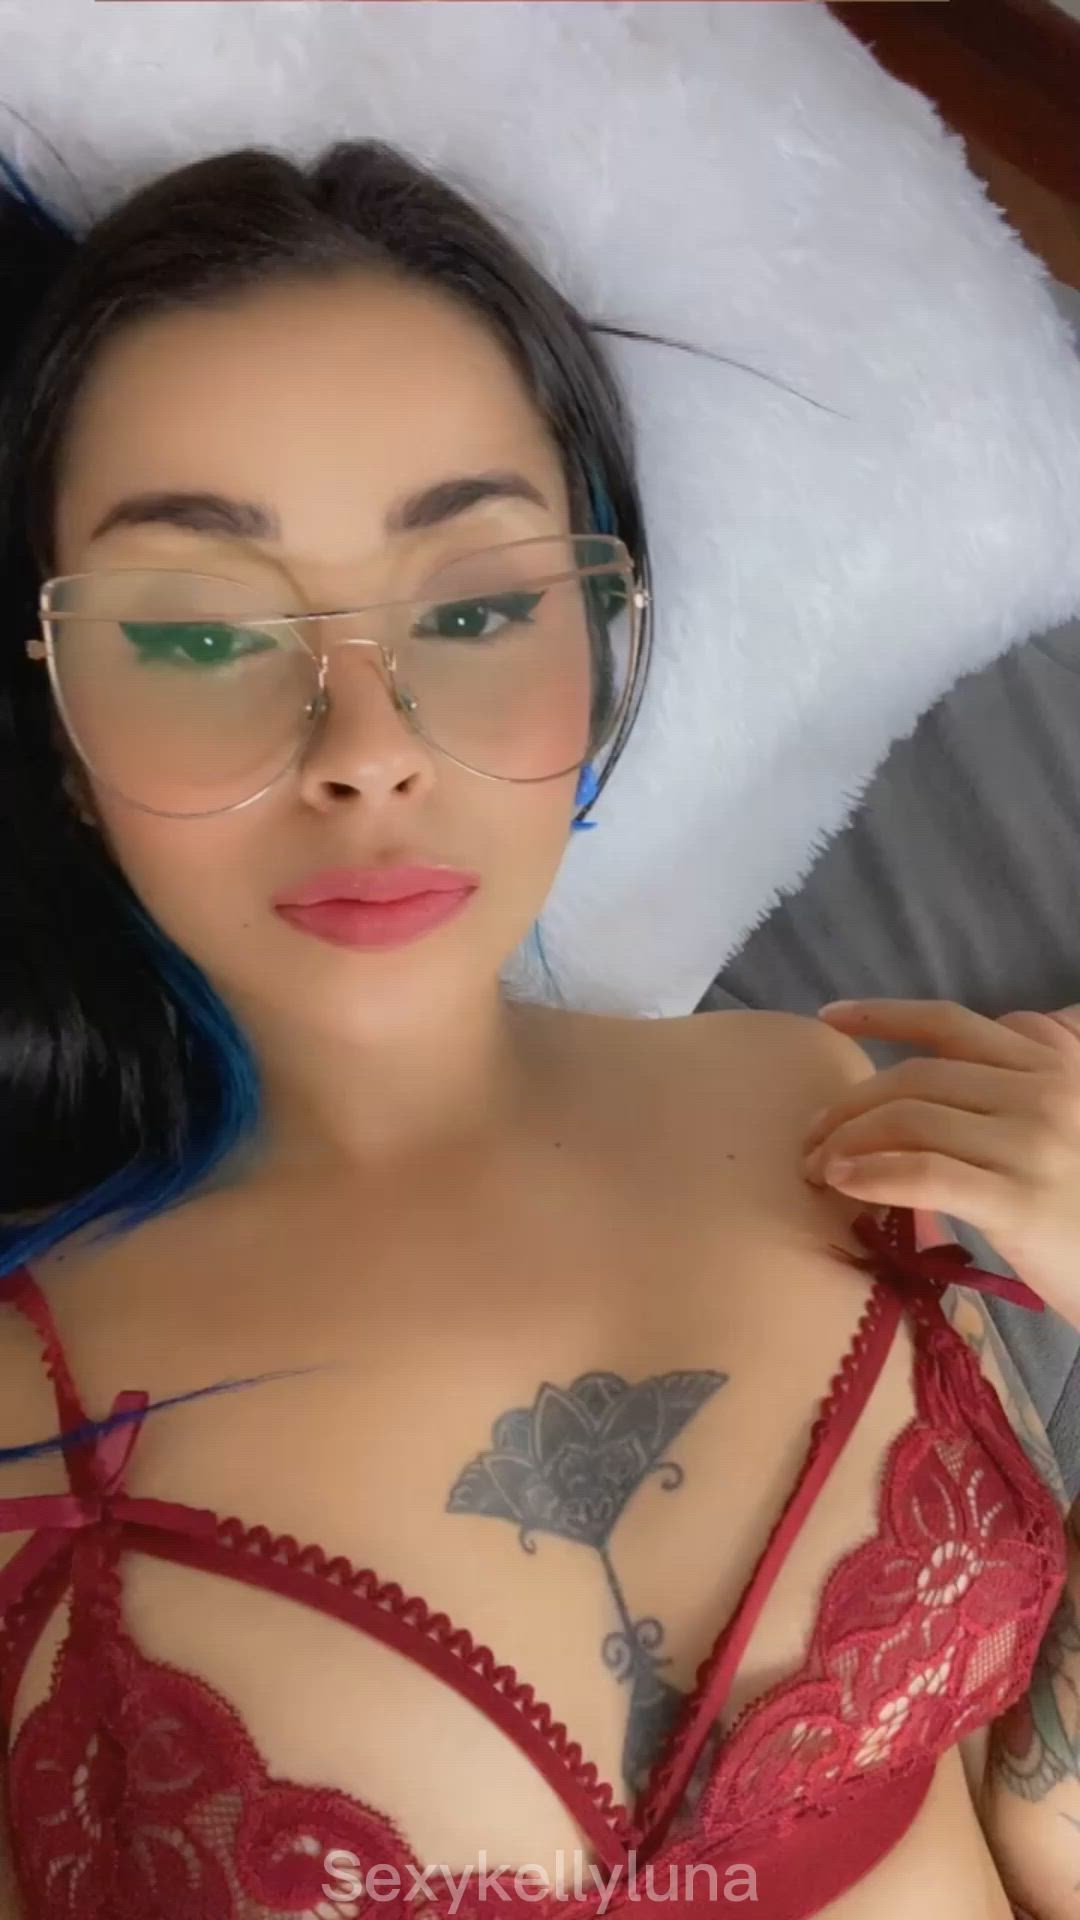 Latina porn video with onlyfans model sexykellyluna <strong>@uncensoredkelly</strong>